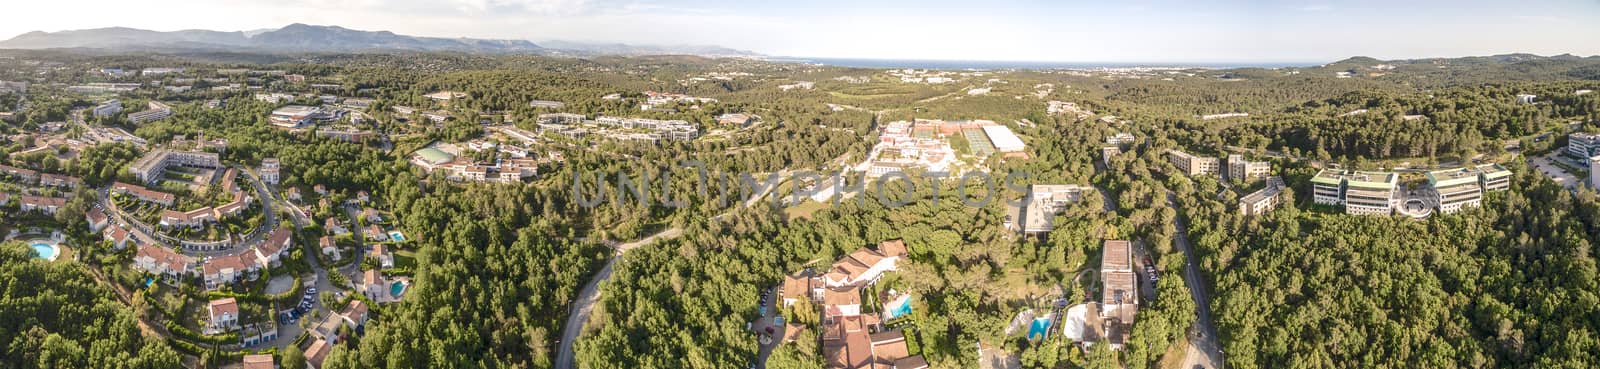 Aerial panoramic view of village in South of France by Bonandbon